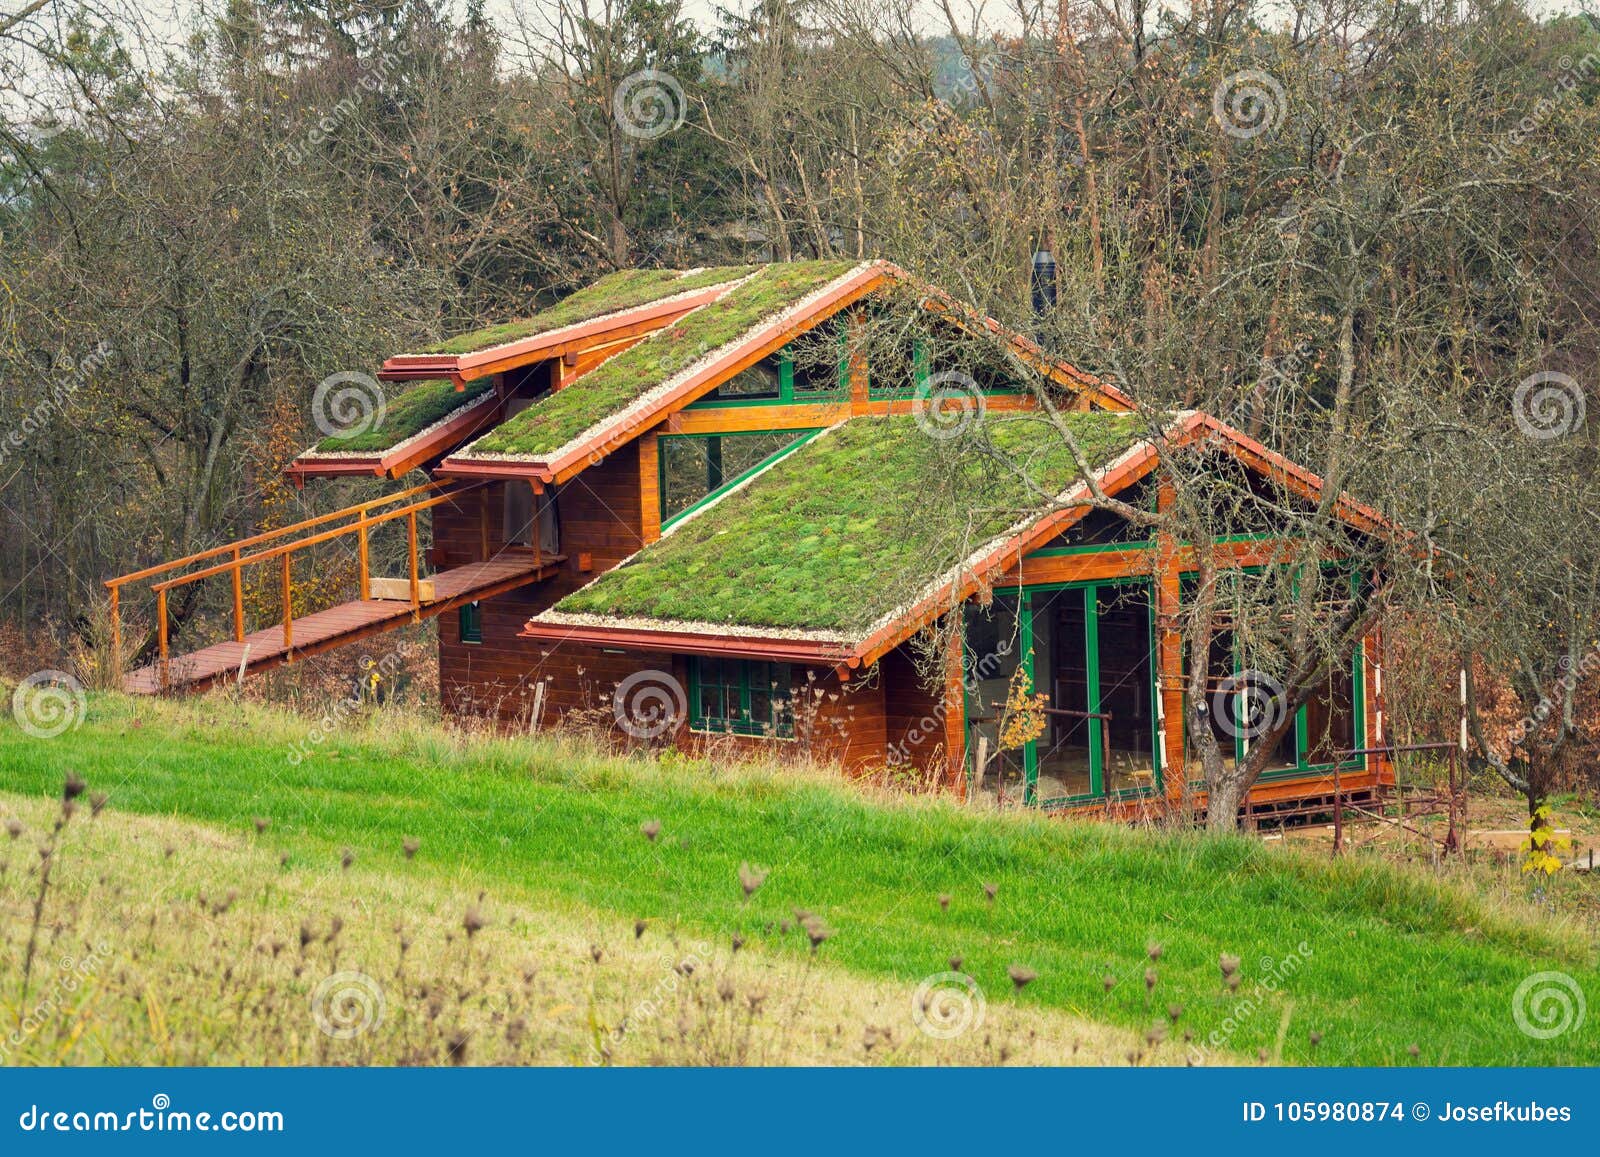 wooden house with extensive green living roof covered with vegetation